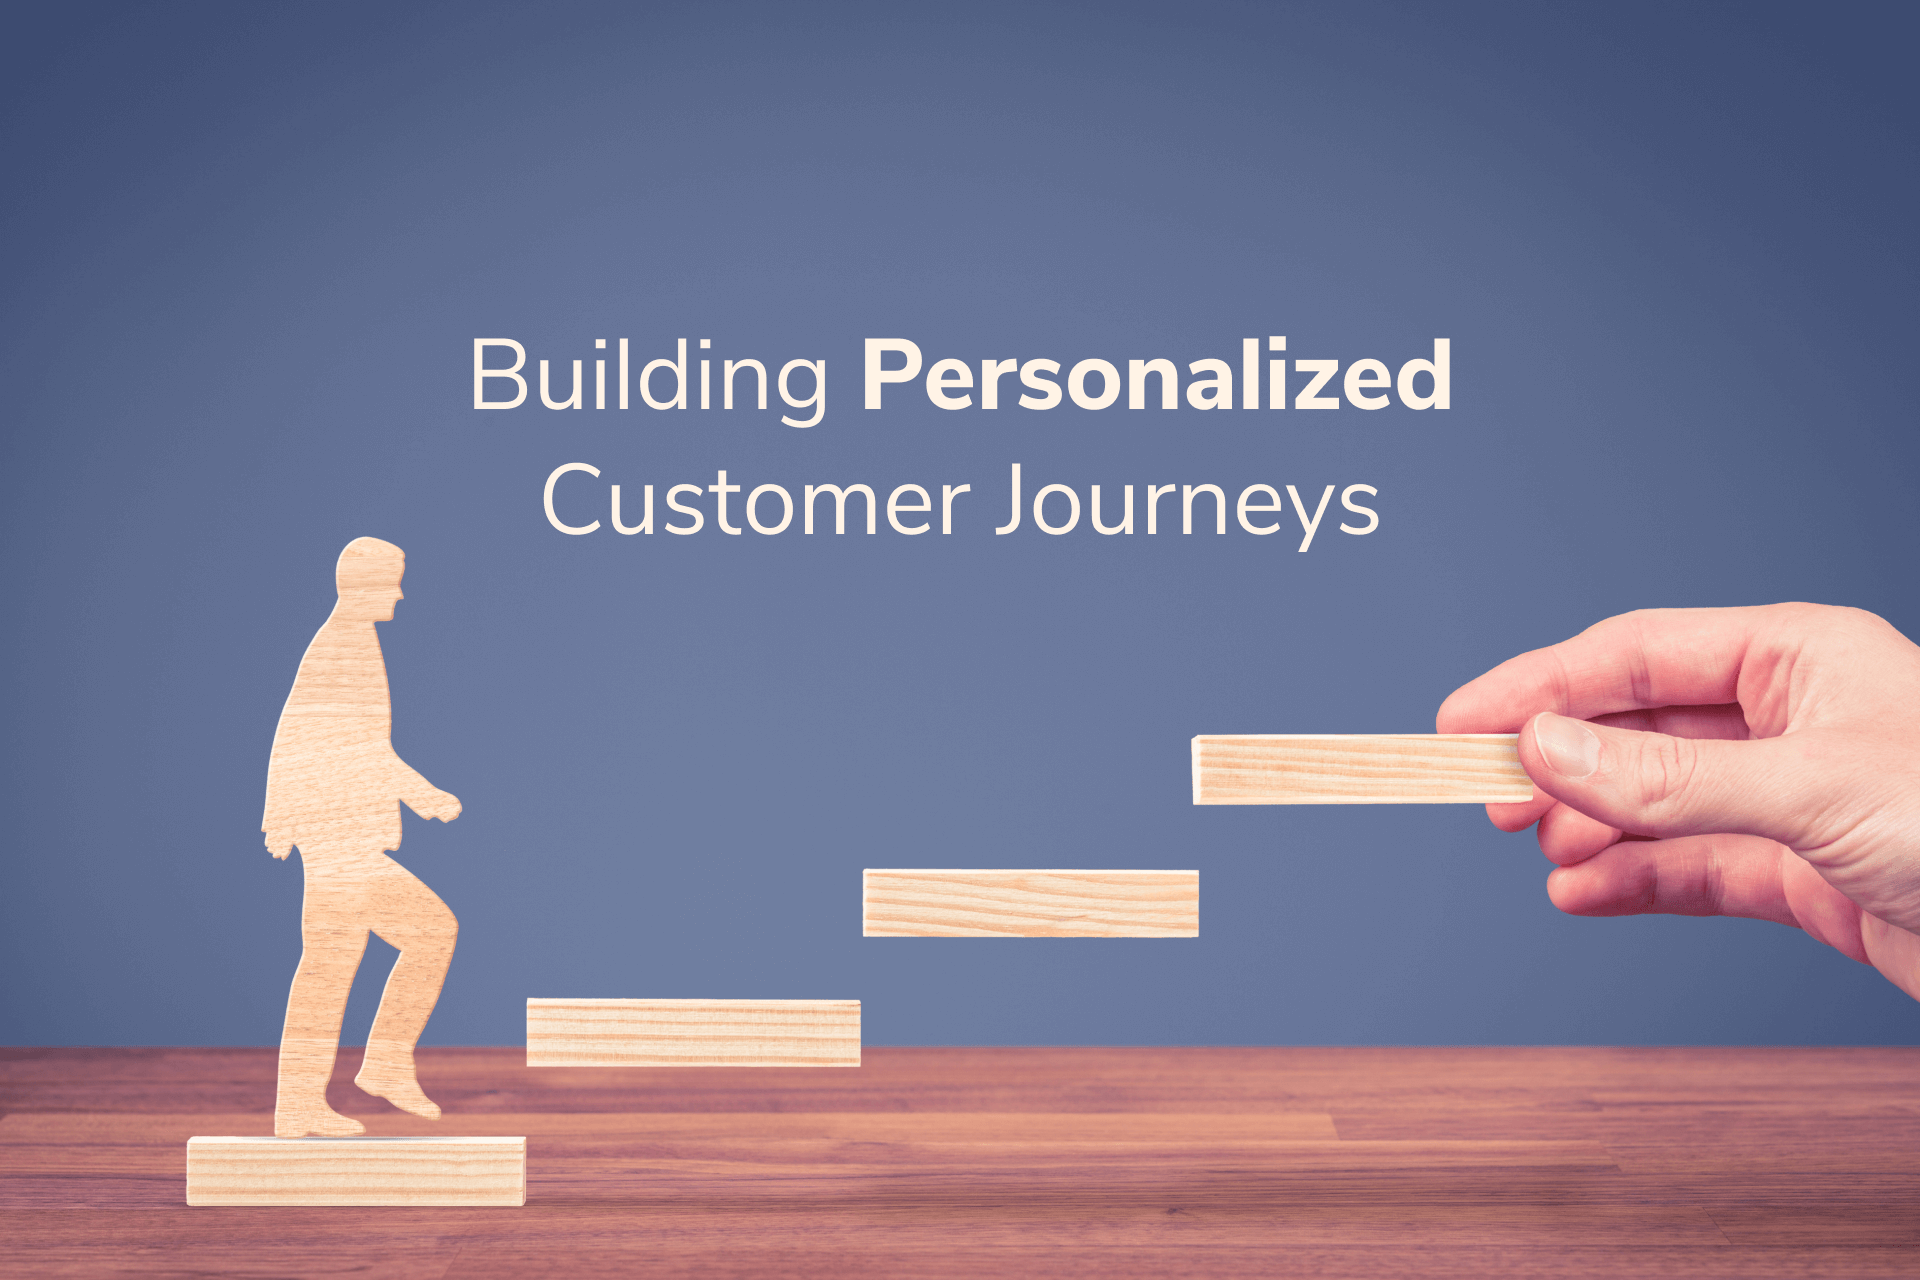 Using Connected Data to Deliver Personalized Multichannel Customer Journeys